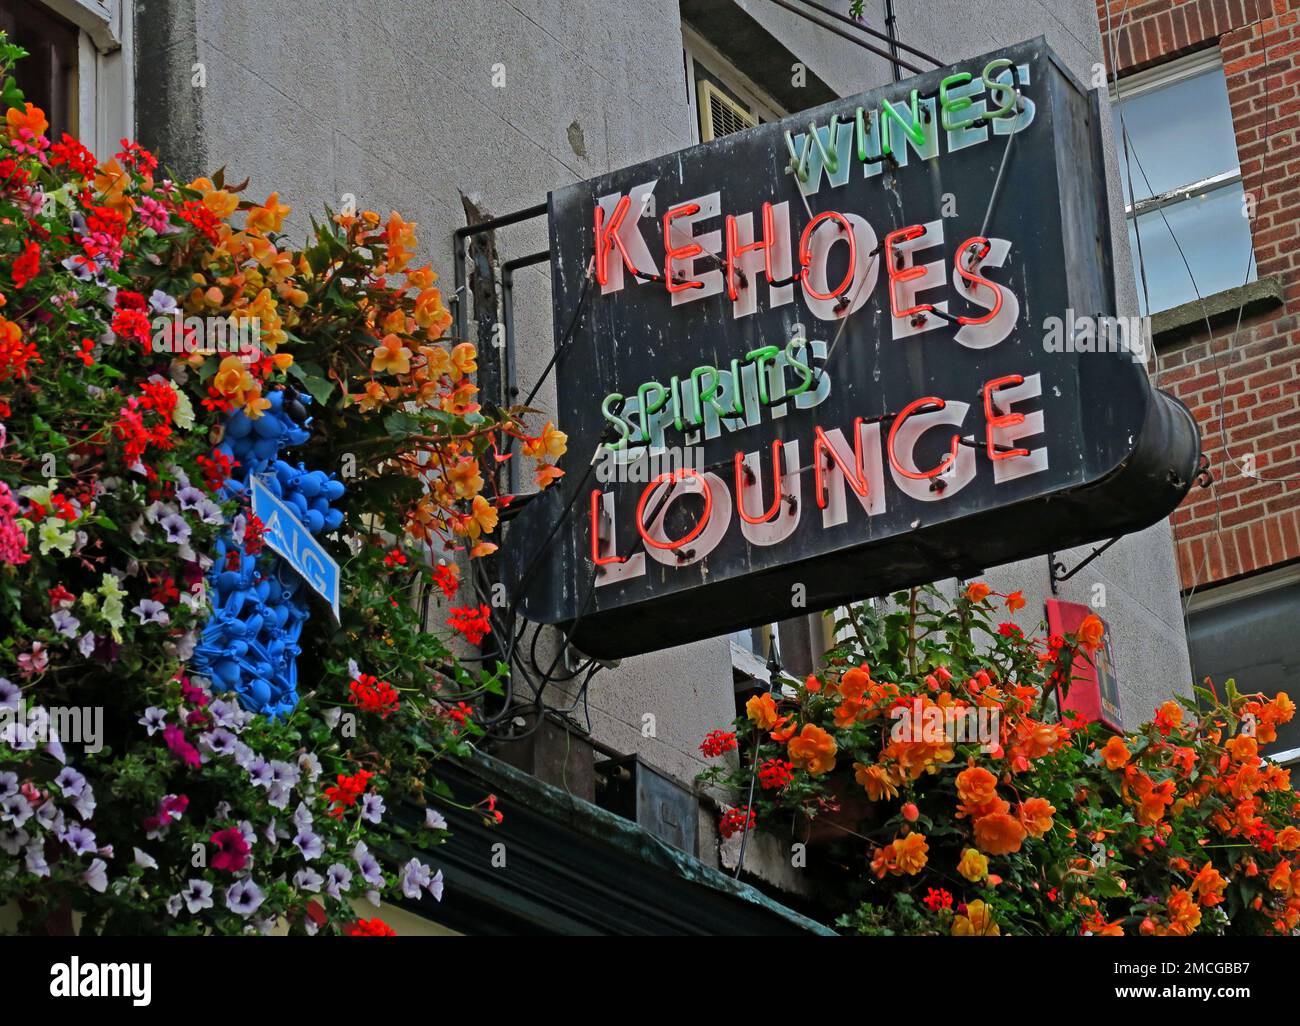 Kehoes Lounge pub Sign in Neon, Wines & Spirits, Traditional Irish Watering Hole, 9 Anne St S, Dublin, Eire, D02 NY88, Irlande Banque D'Images